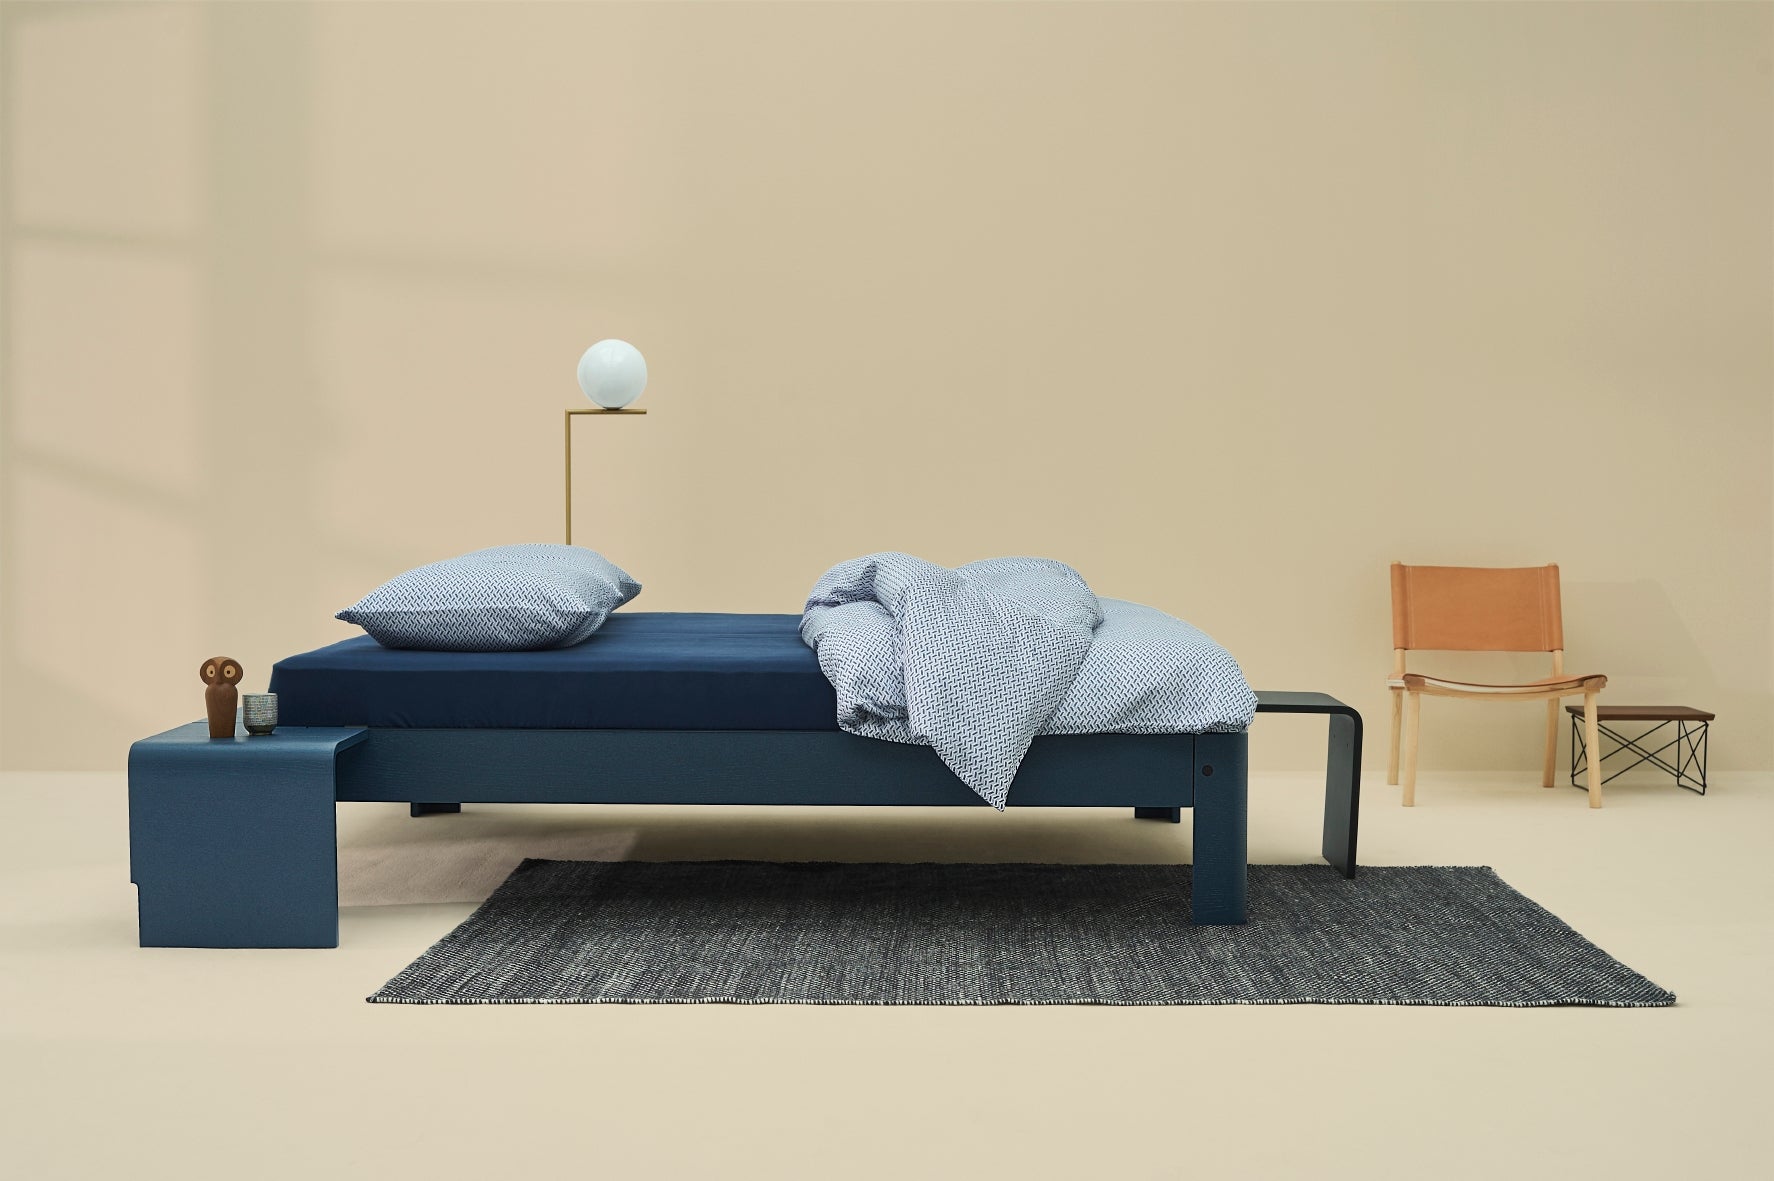 baard Specialist Vuil Auronde by 'Auping' @ RESTED | Sleep Engineering – Rested Sleep Engineering